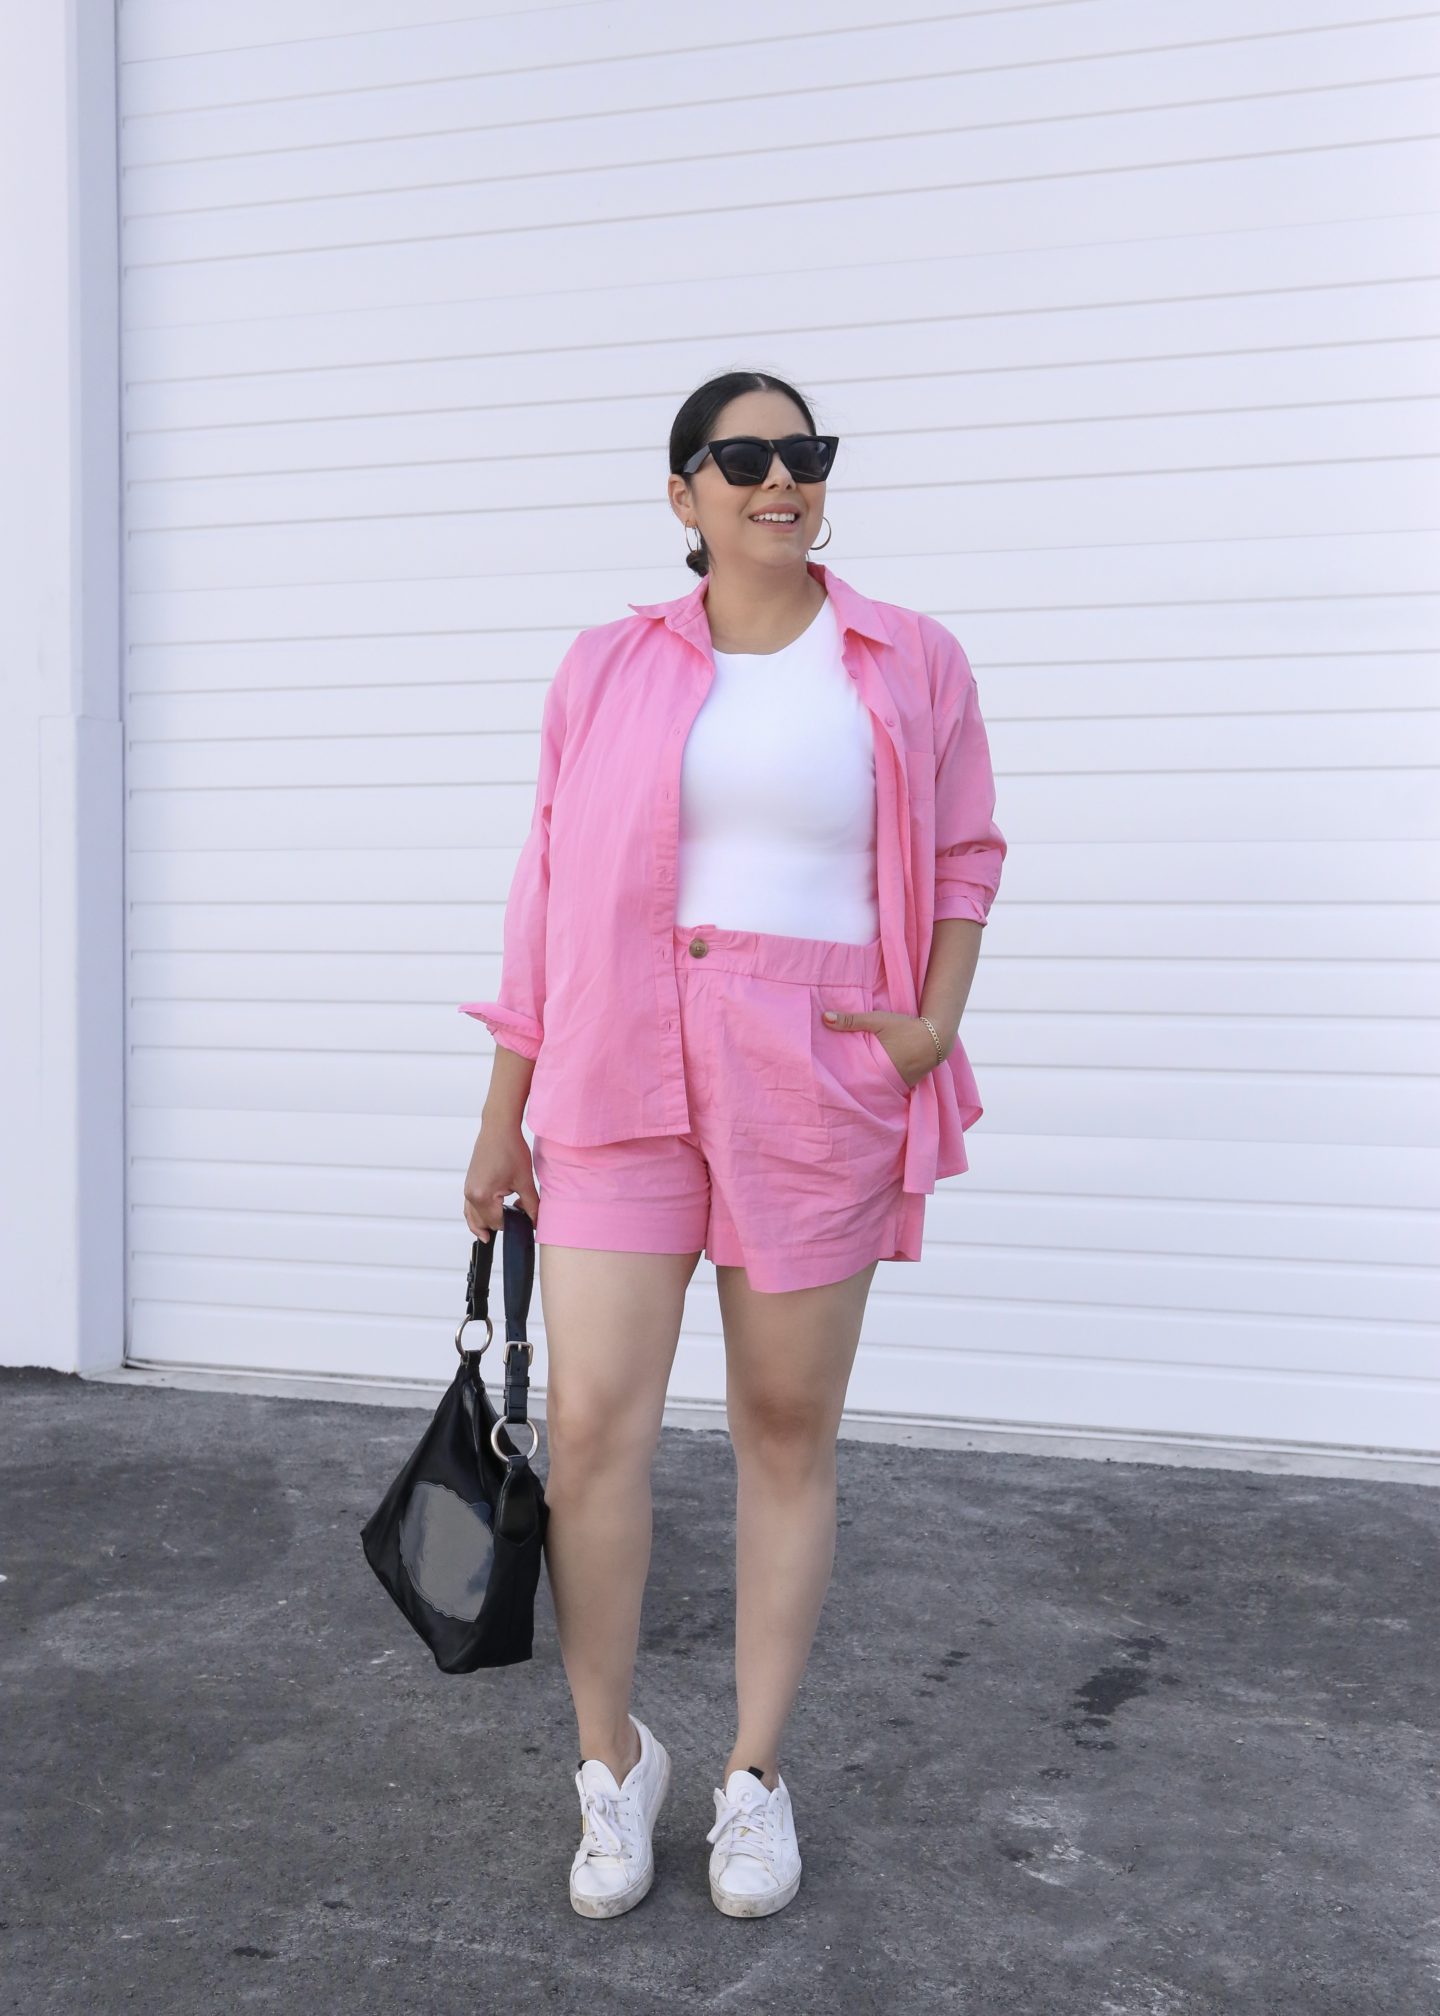 Hot Pink Bermuda Shorts Outfits For Women (1 ideas & outfits